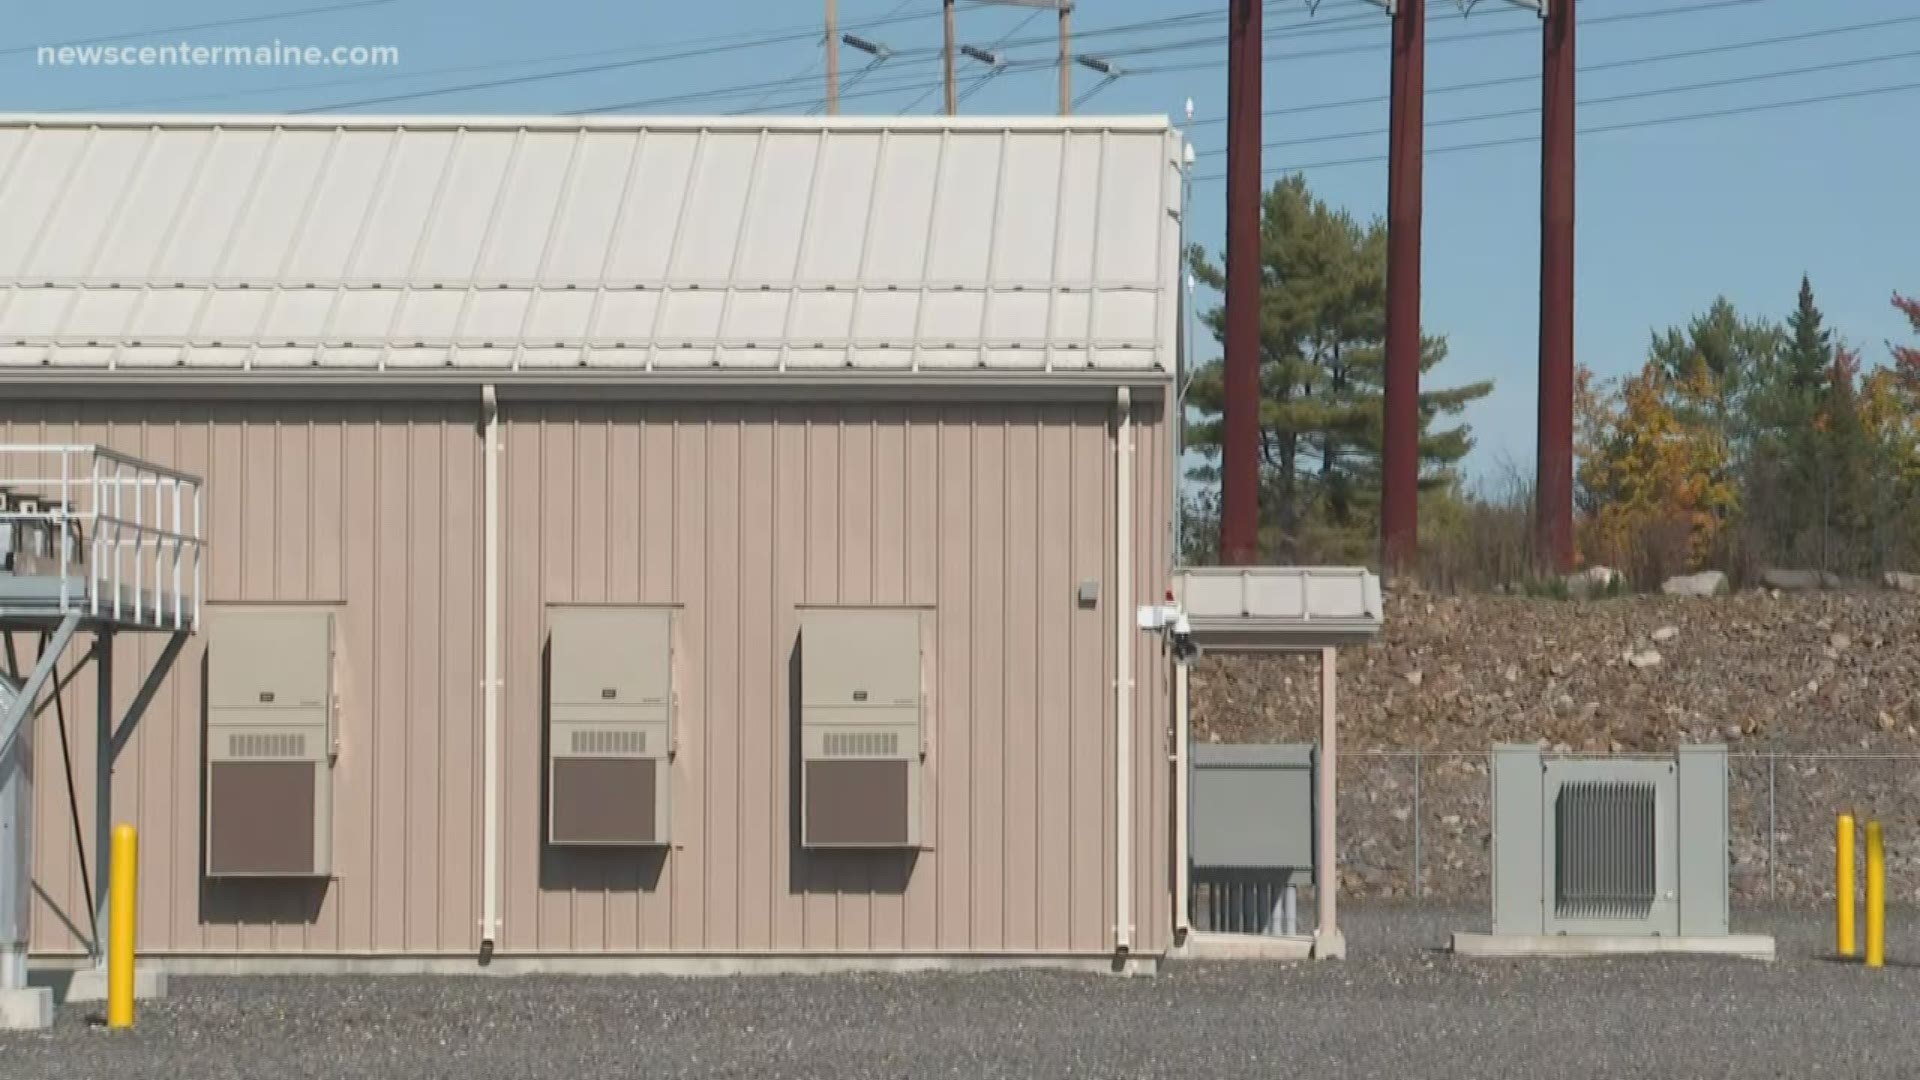 New tech at Central Maine Power / CMP substation in Windsor